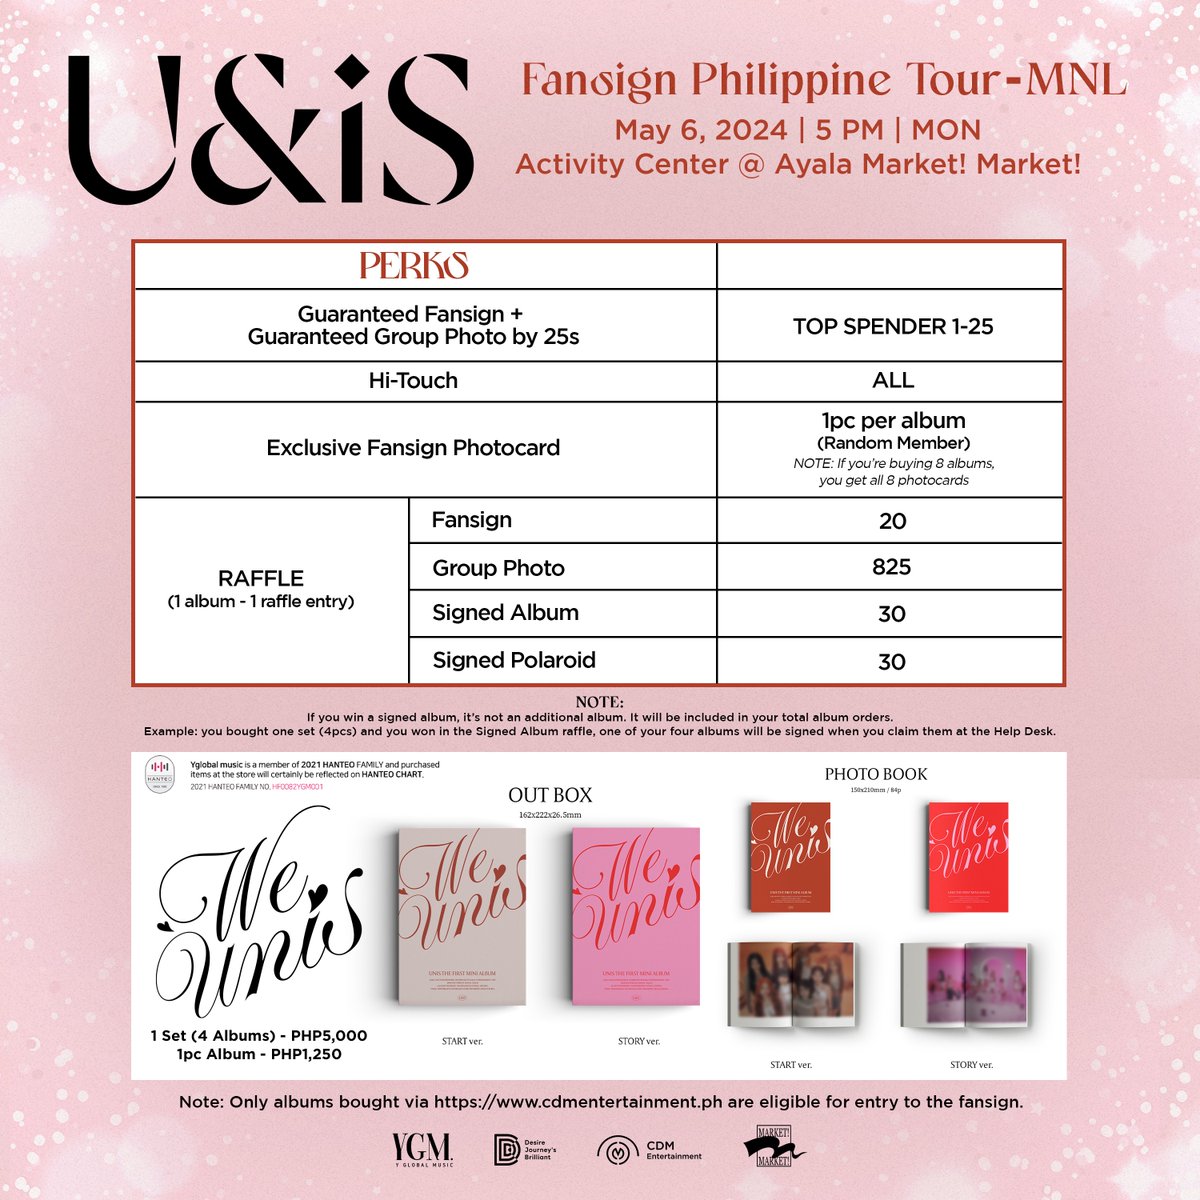 MANILA! Mechanics for Day 2 of UNIS’ Fansign Event is here! Same as other cities — Buy one set of UNIS’ “WE UNIS” album via cdmentertainment.ph. One set of album costs PHP5,000 and includes: 🧡 One ticket for the fansign event 🧡 1 exclusive fansign photocard per album 🧡…